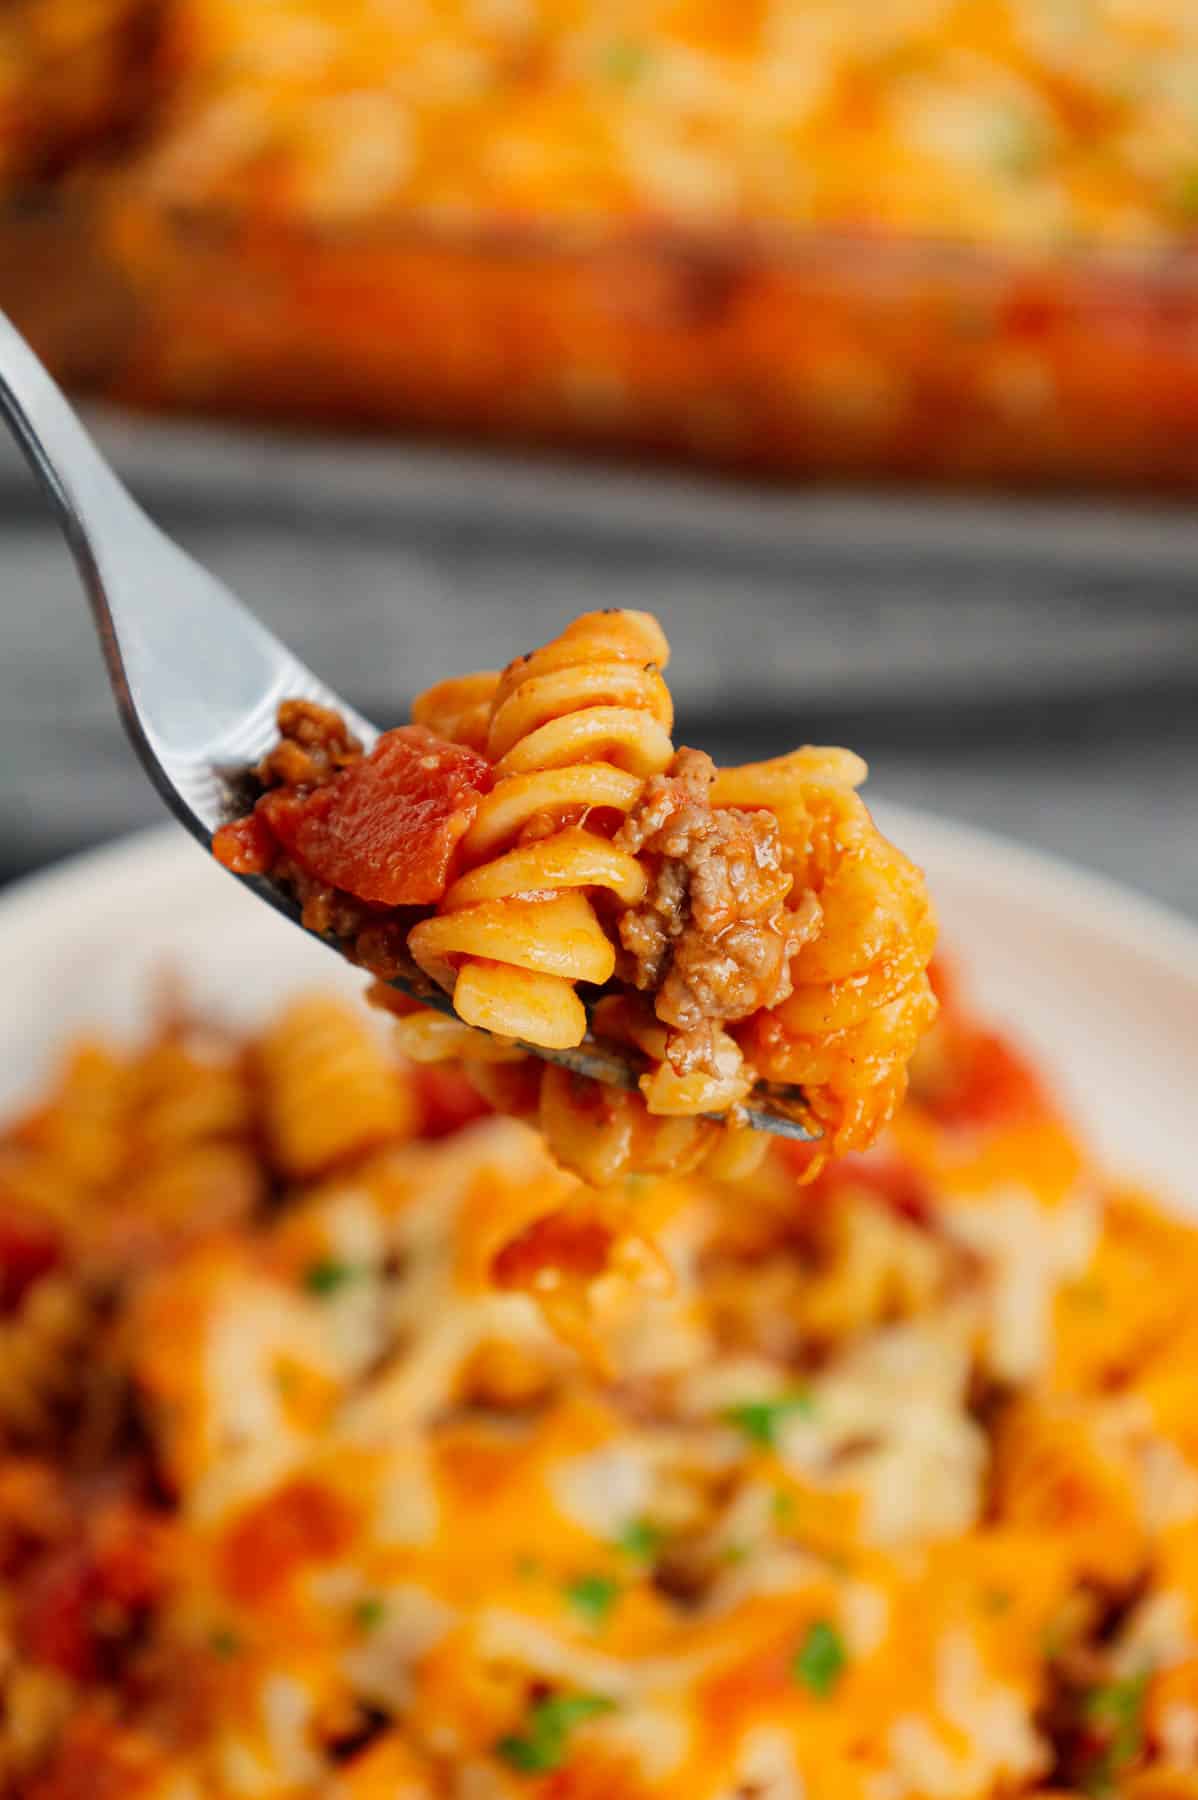 Cheeseburger Casserole is a hearty dish loaded with rotini pasta, ground beef, diced red onions, diced tomatoes, cheddar soup and shredded cheddar cheese.